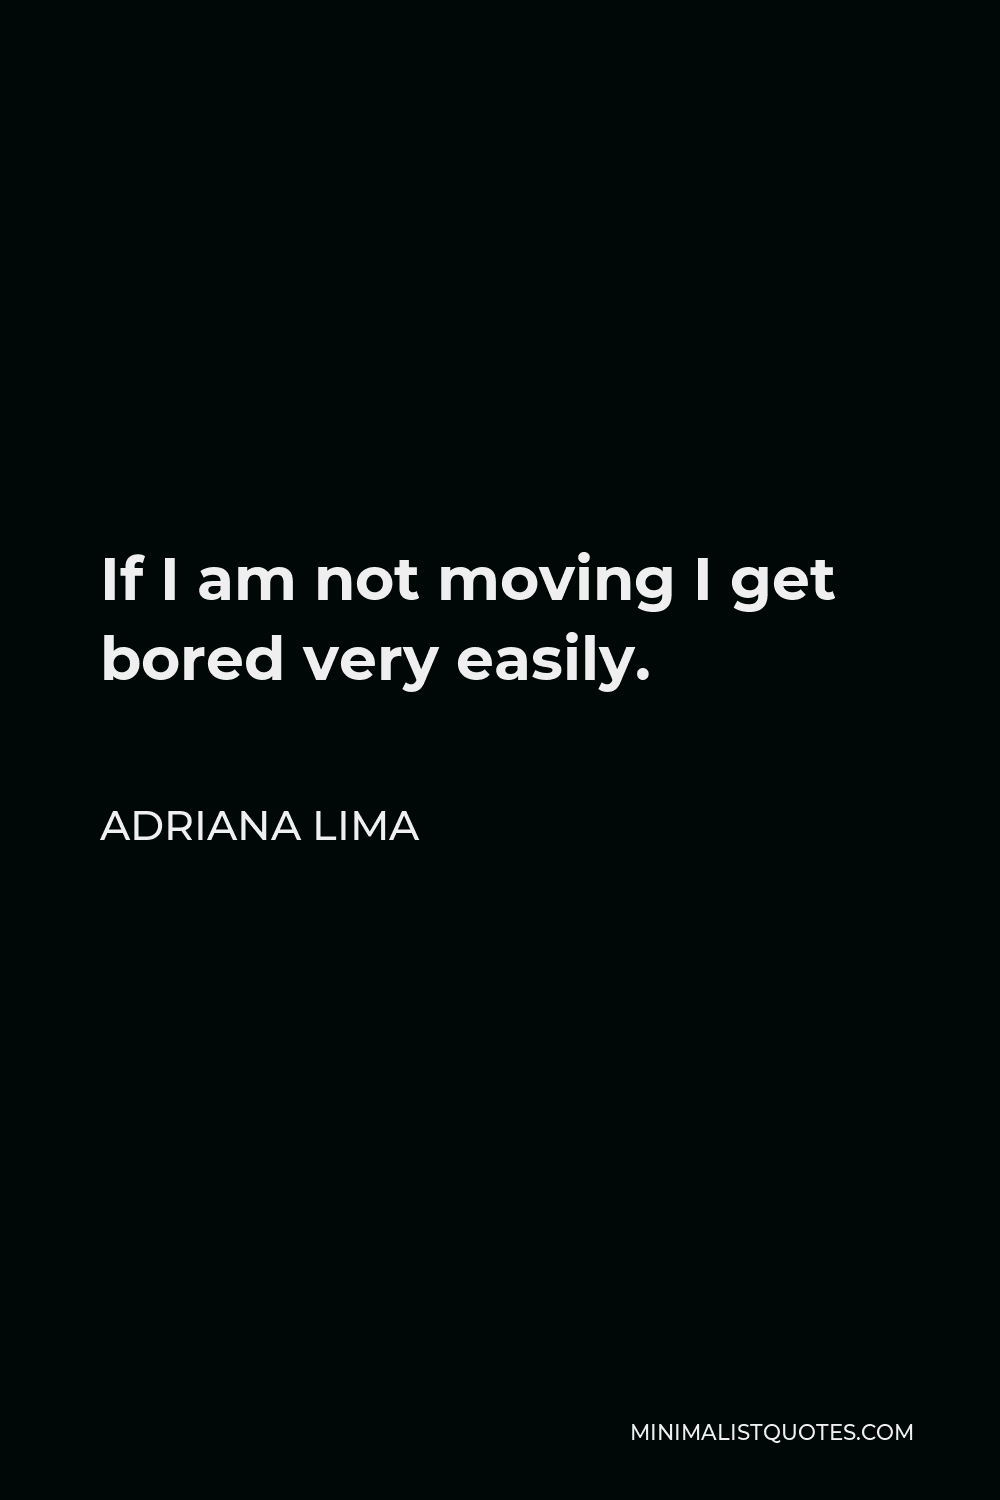 Adriana Lima Quote - If I am not moving I get bored very easily.